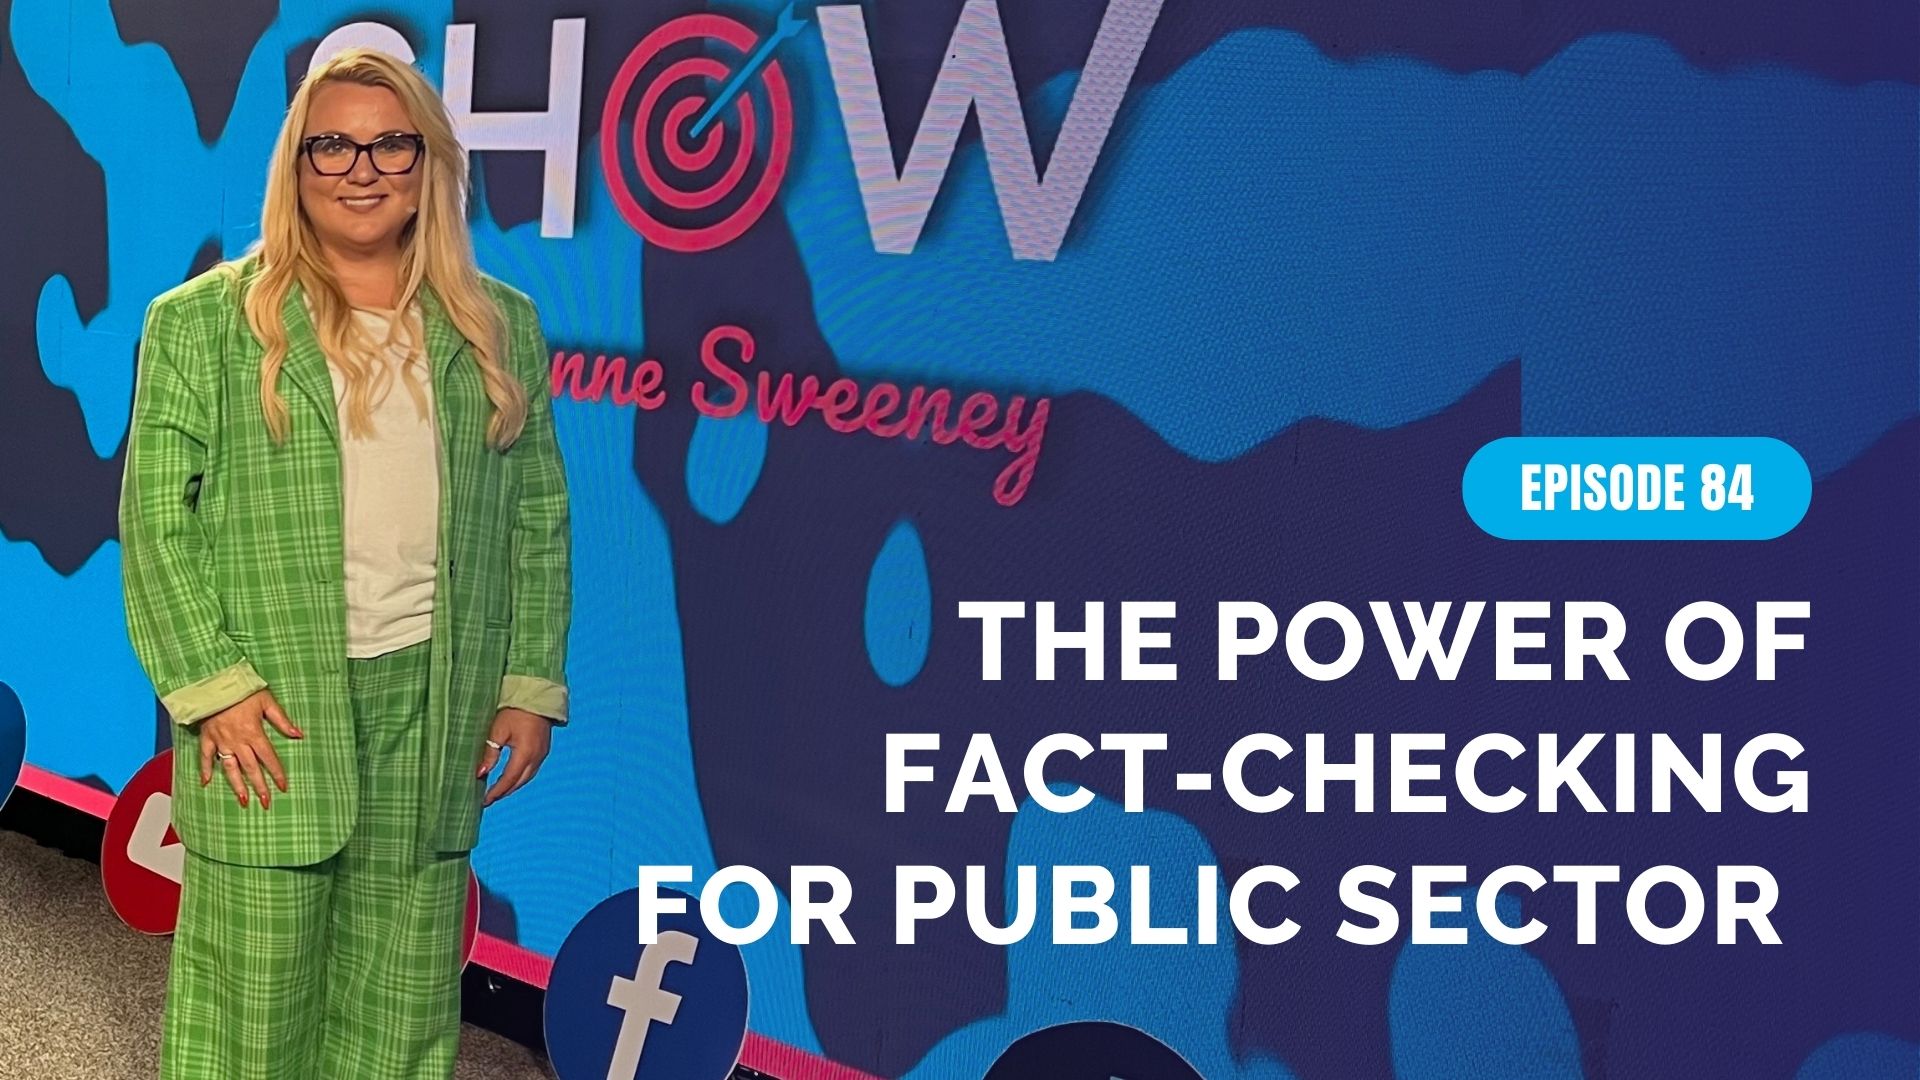 The Power of Fact-Checking for Public Sector